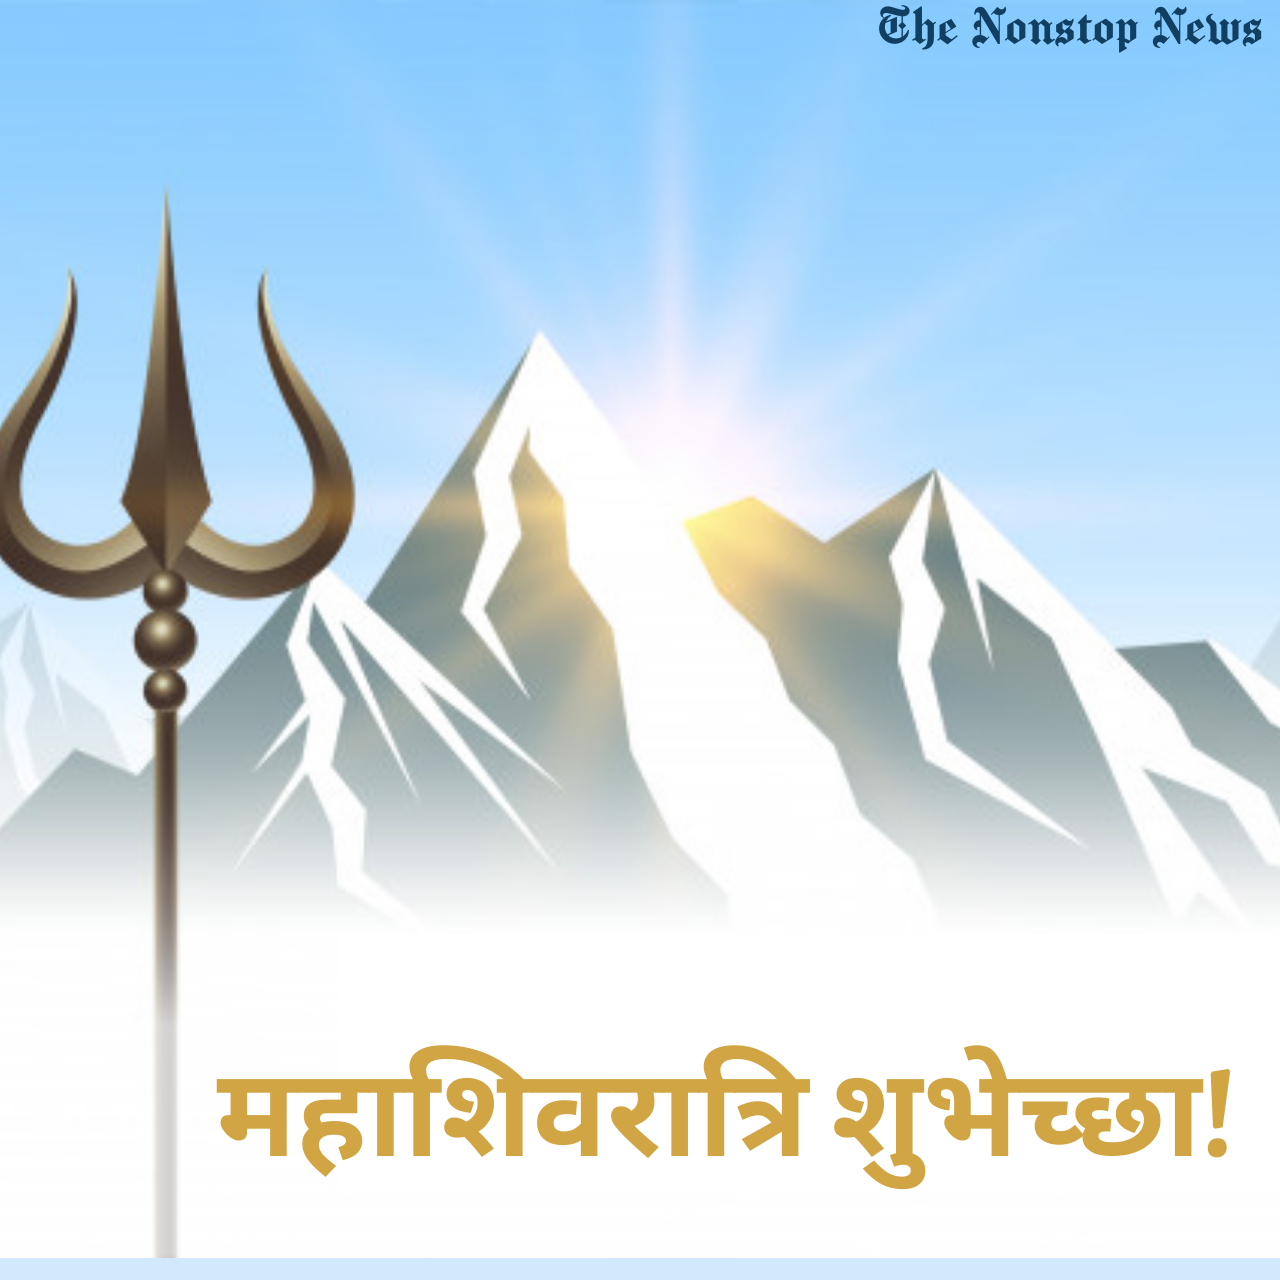 Maha Shivratri 2021 Wishes in Marathi Quotes, Messages, Greetings, and HD Images to Share on Bhola Chaudas